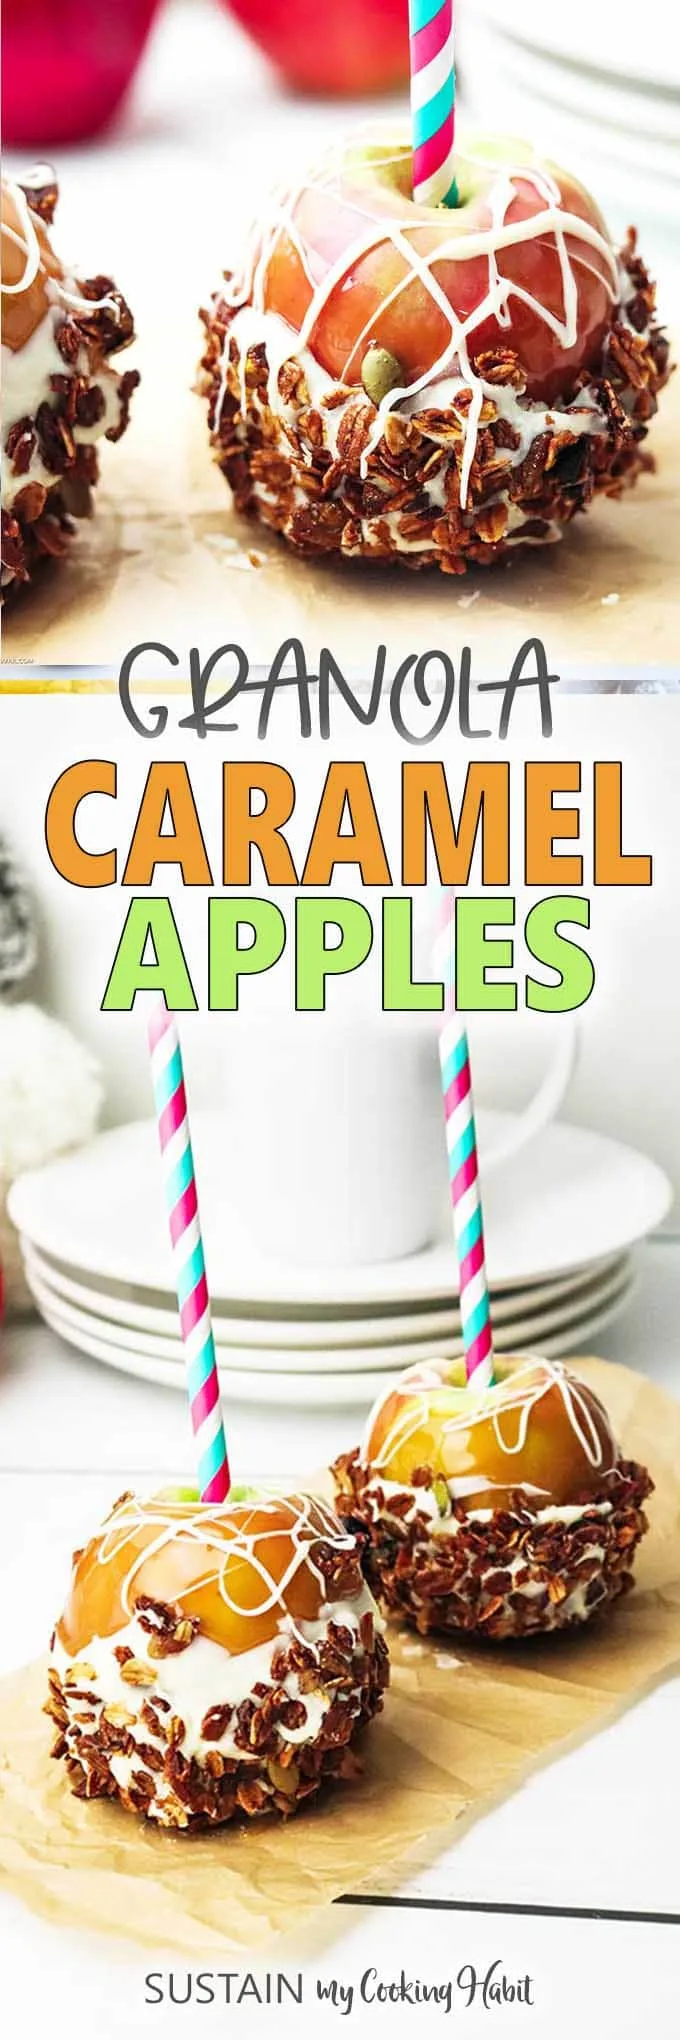 Collage of images with text overlay showing granola-dipped caramel apples.